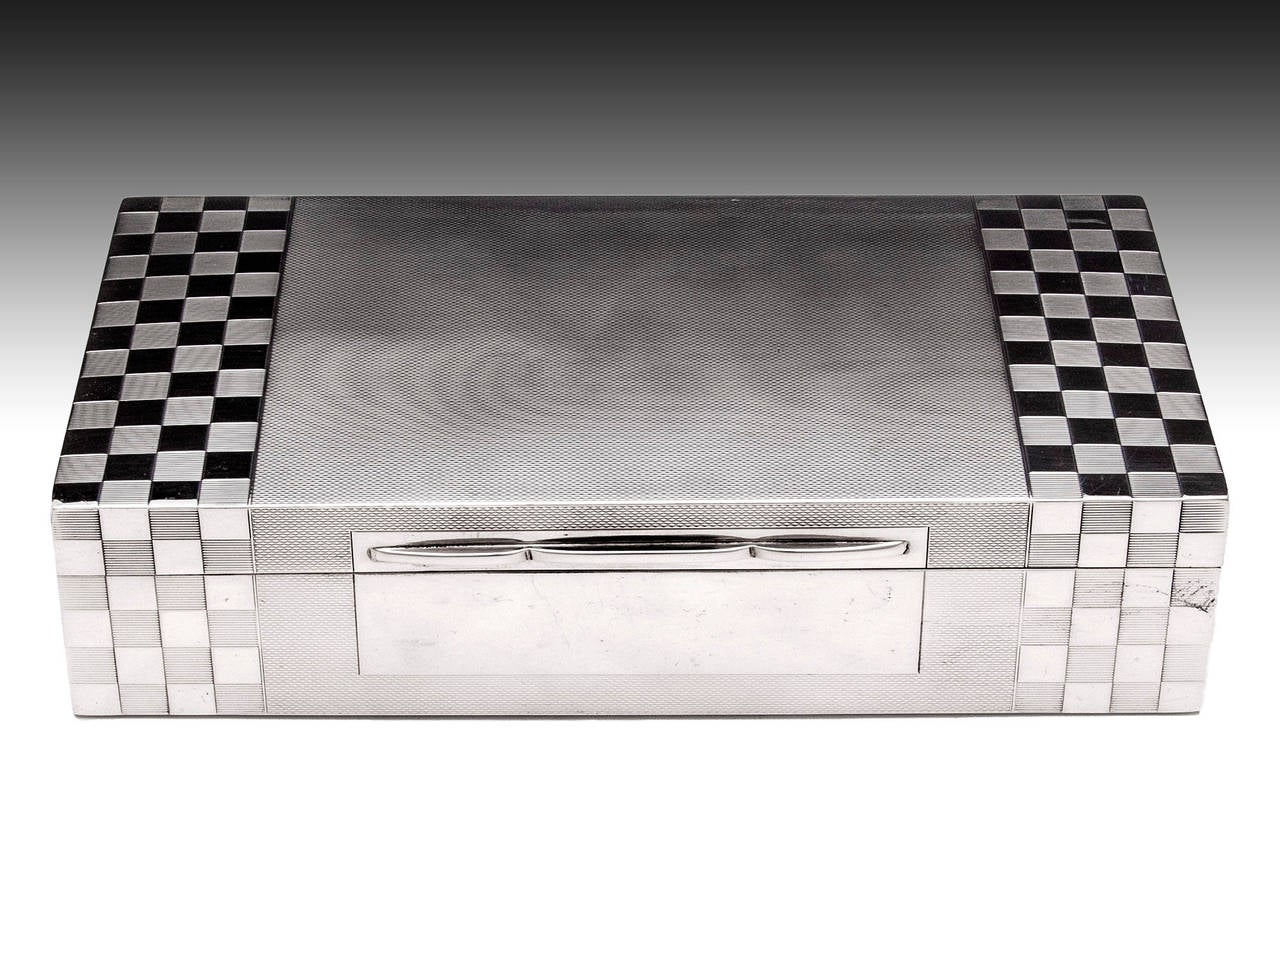 Sterling silver cigarette case by Birmingham silversmith A. Wilcox. 

The case features a textured finished with a chequered pattern on the front and top. The interior is lined with cedar wood with a removable divider. 

There is a small bit of